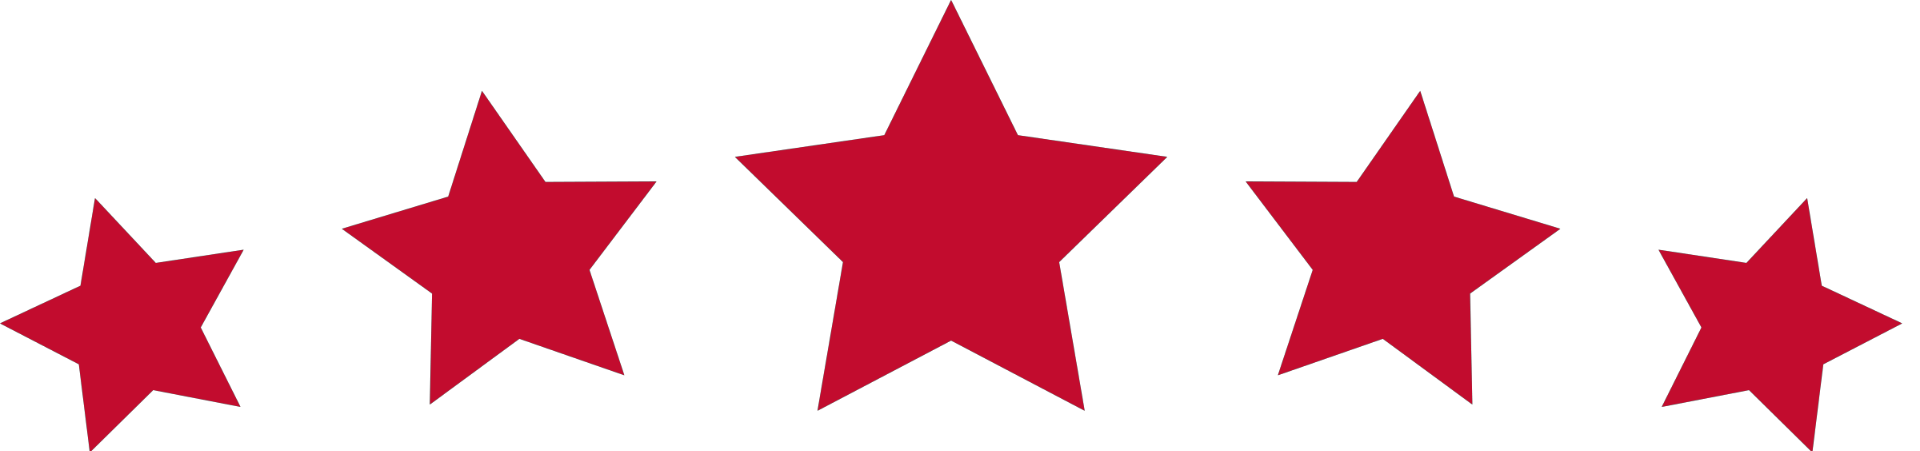 A row of red stars on a white background.